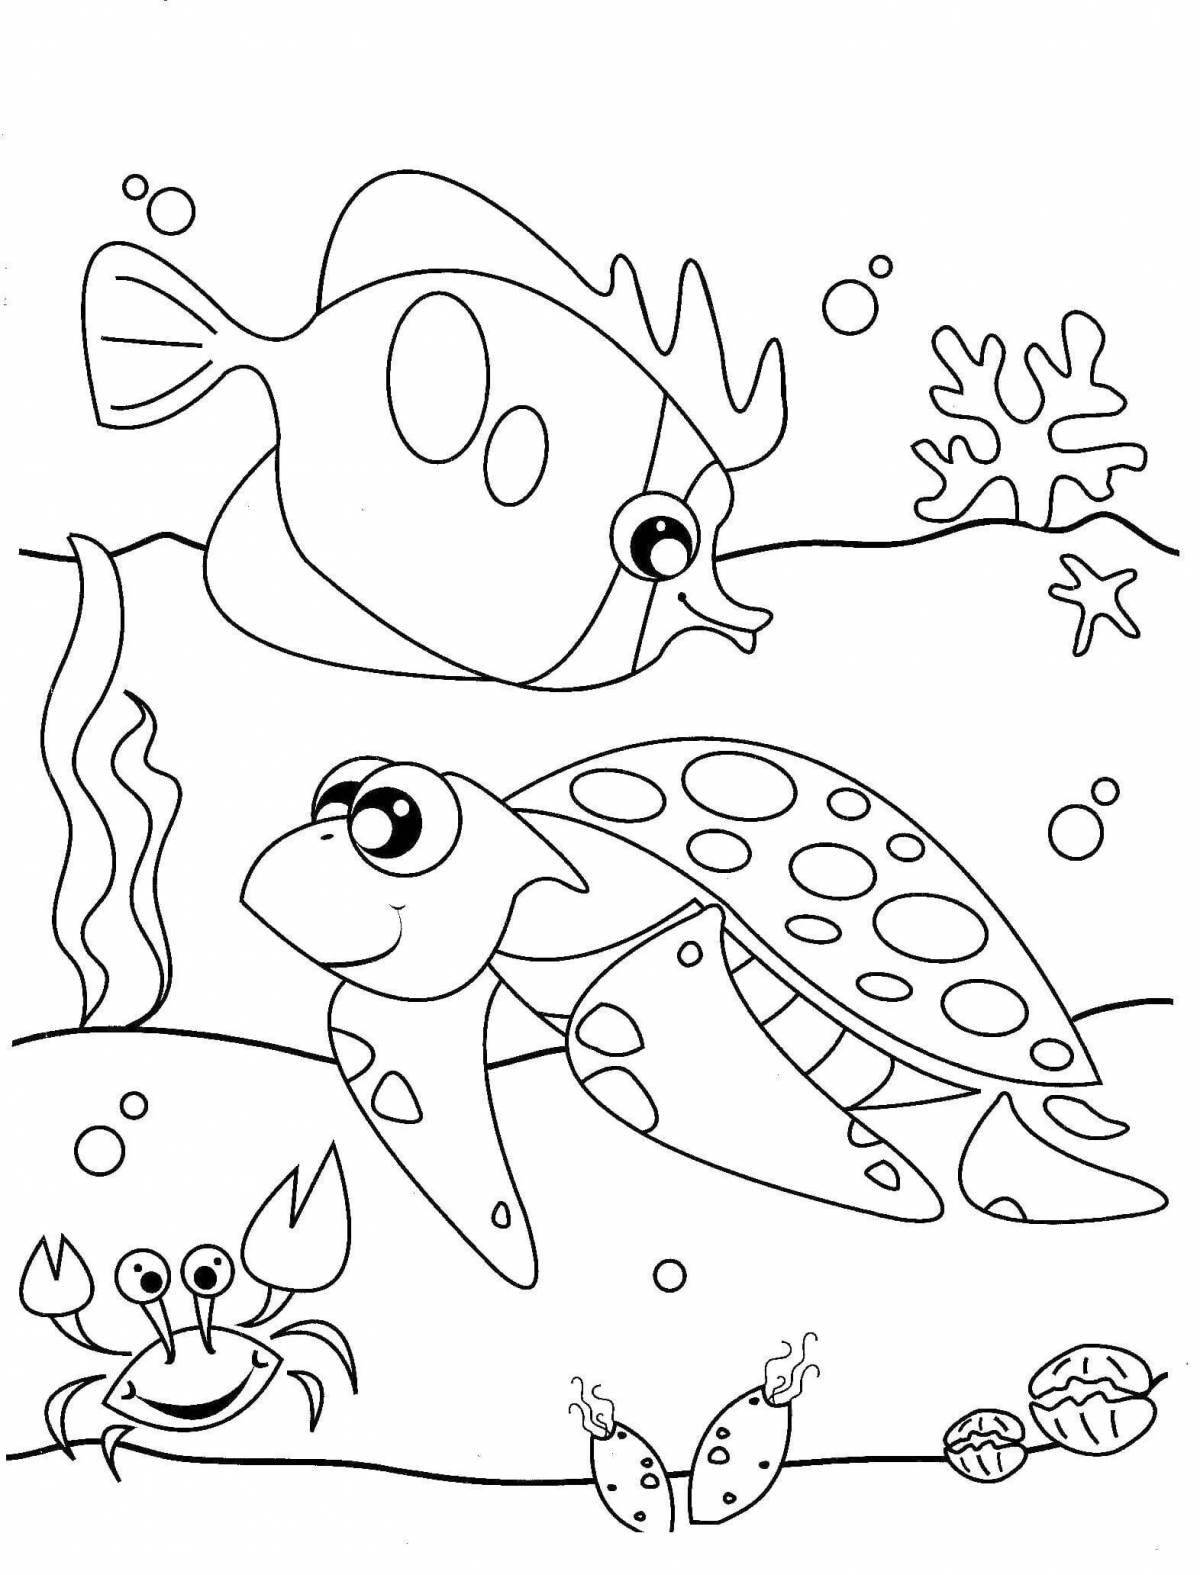 Glowing water children's world coloring book